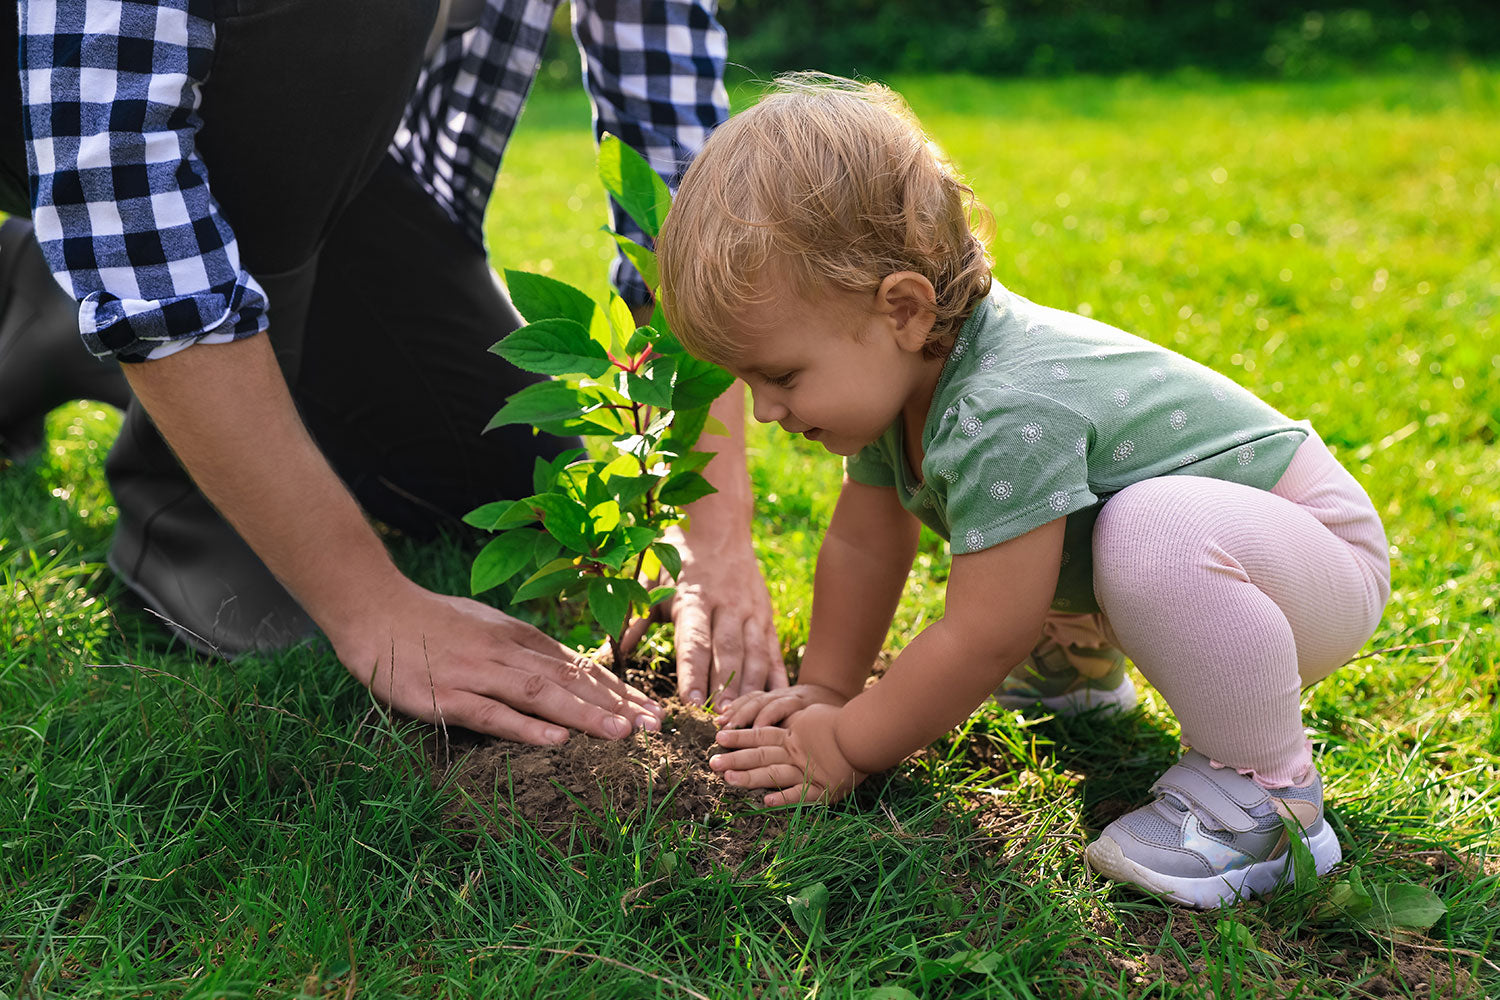 Planting a Tree is a Great Way to Offset Your Carbon Footprint